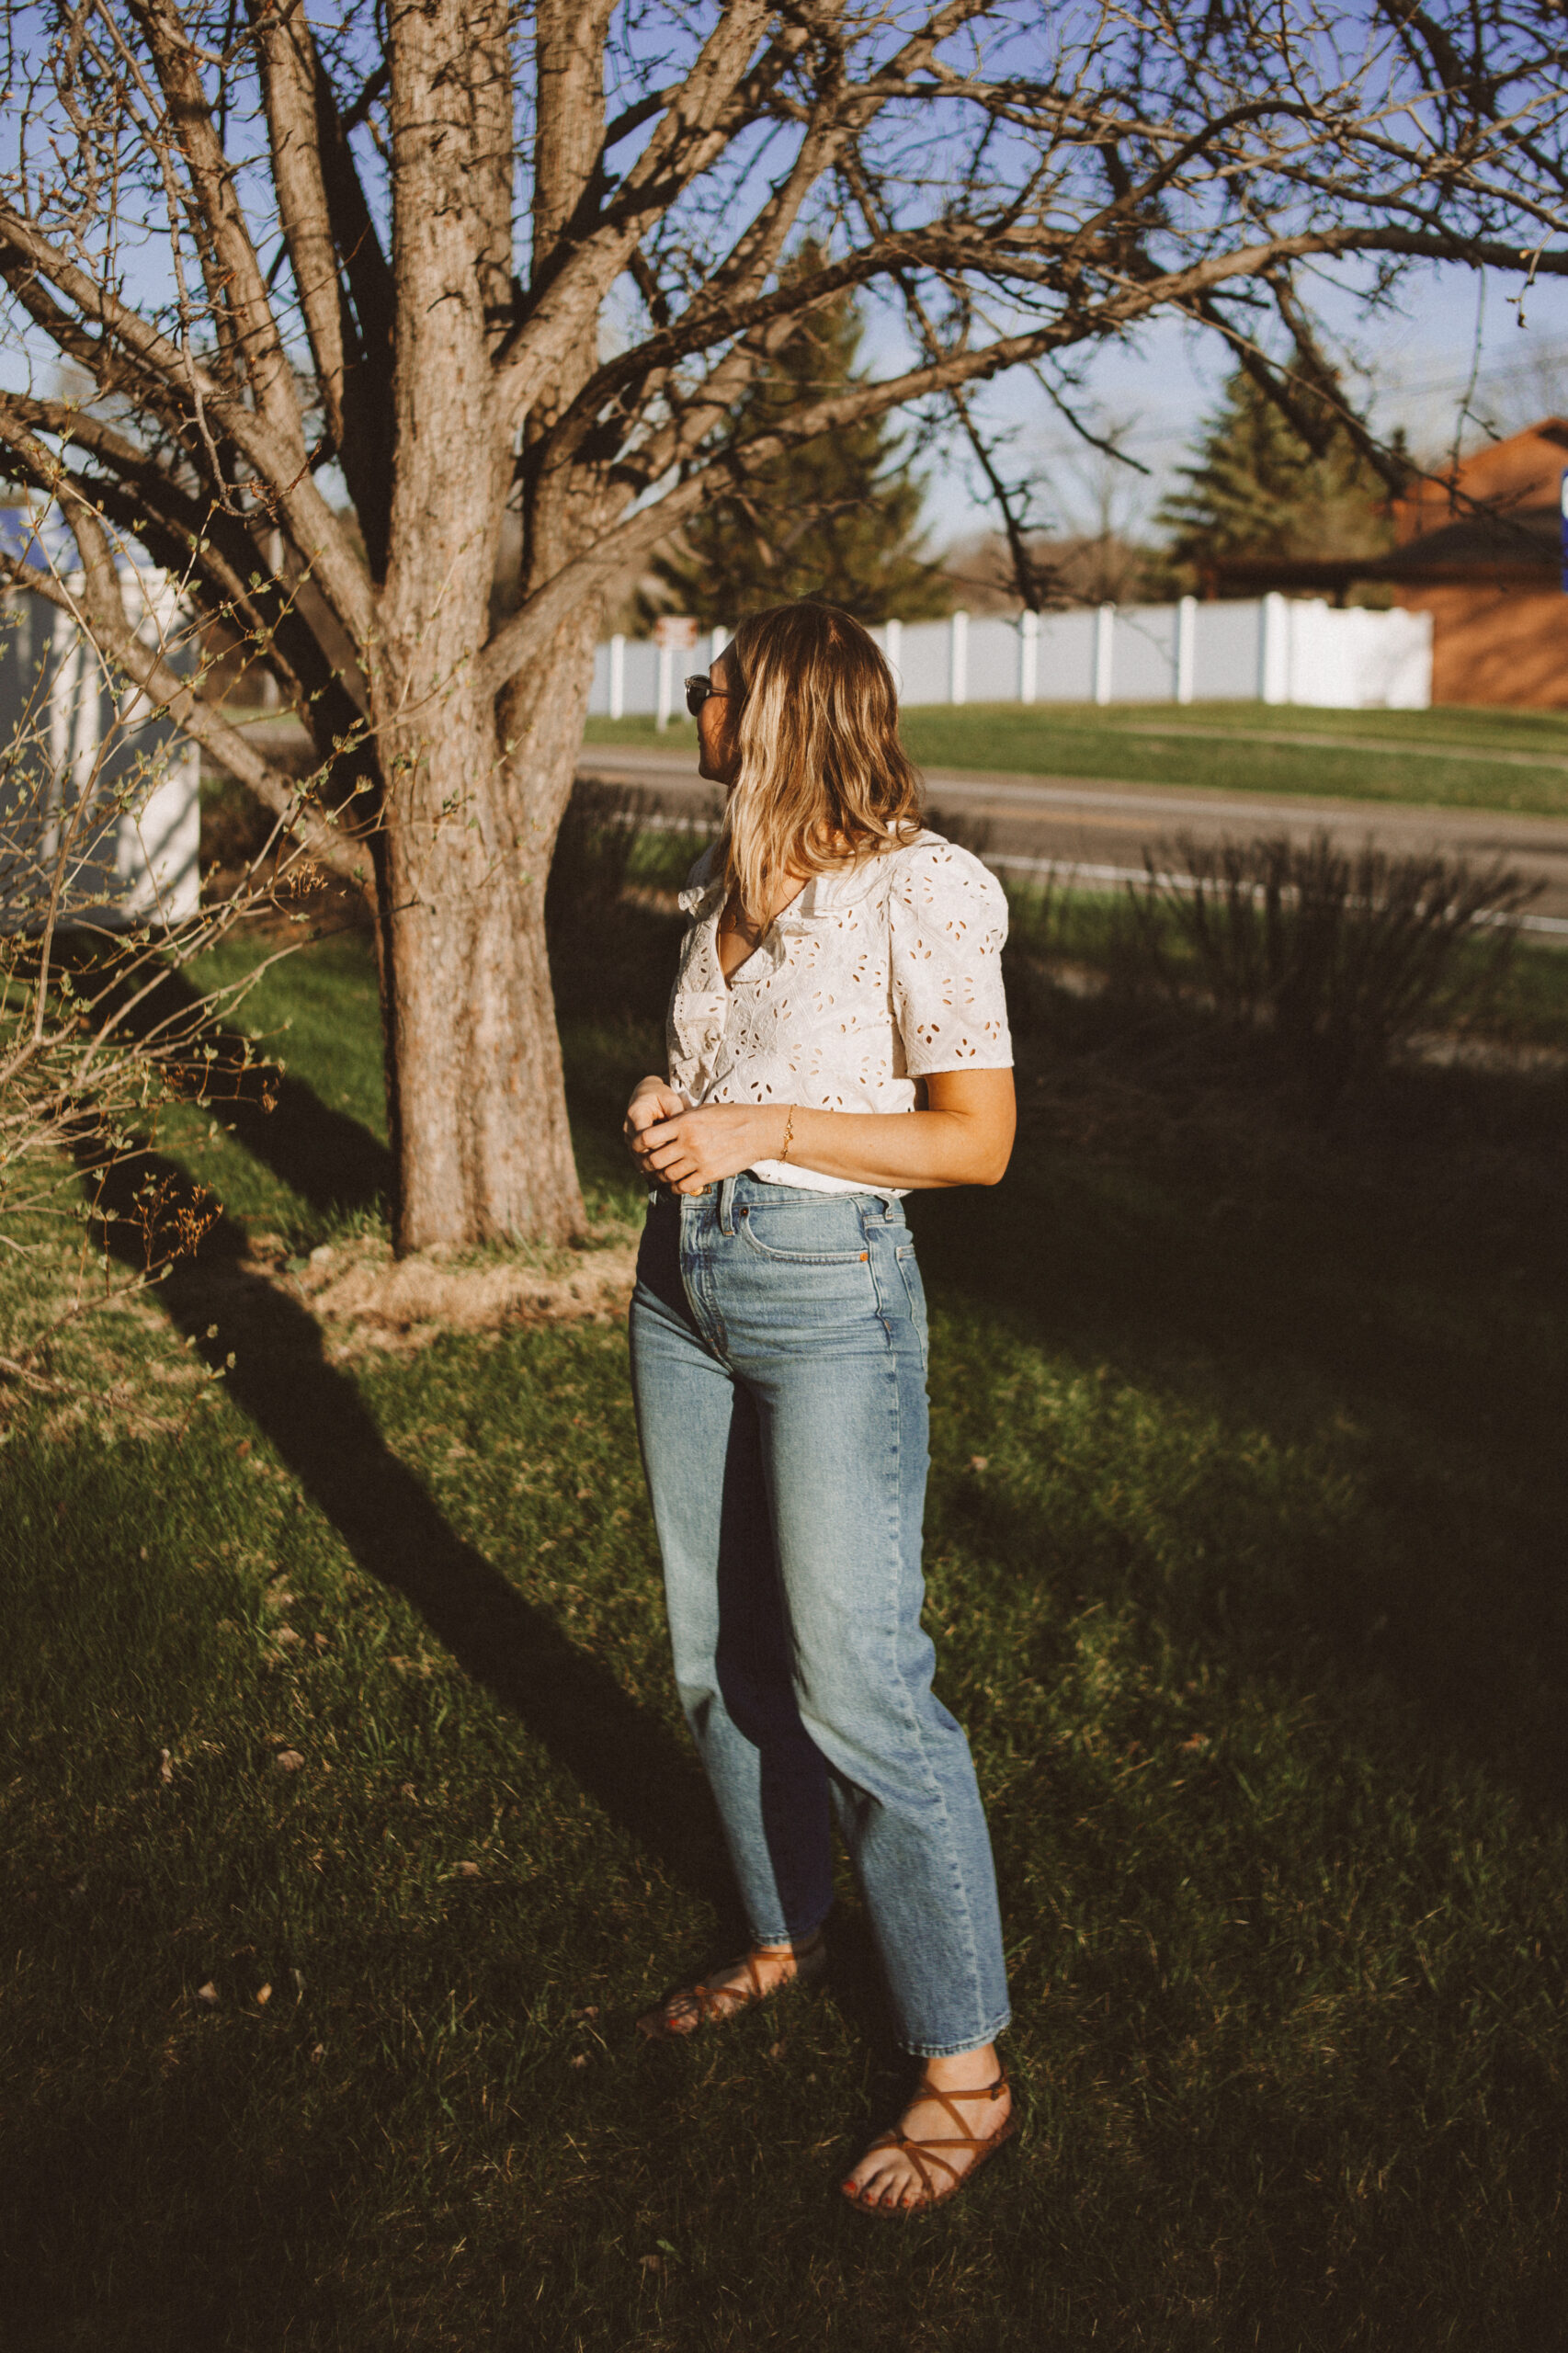 Karin Emily wears a white sezane top, wide leg Madewell jeans, and minimal ethically made sandals